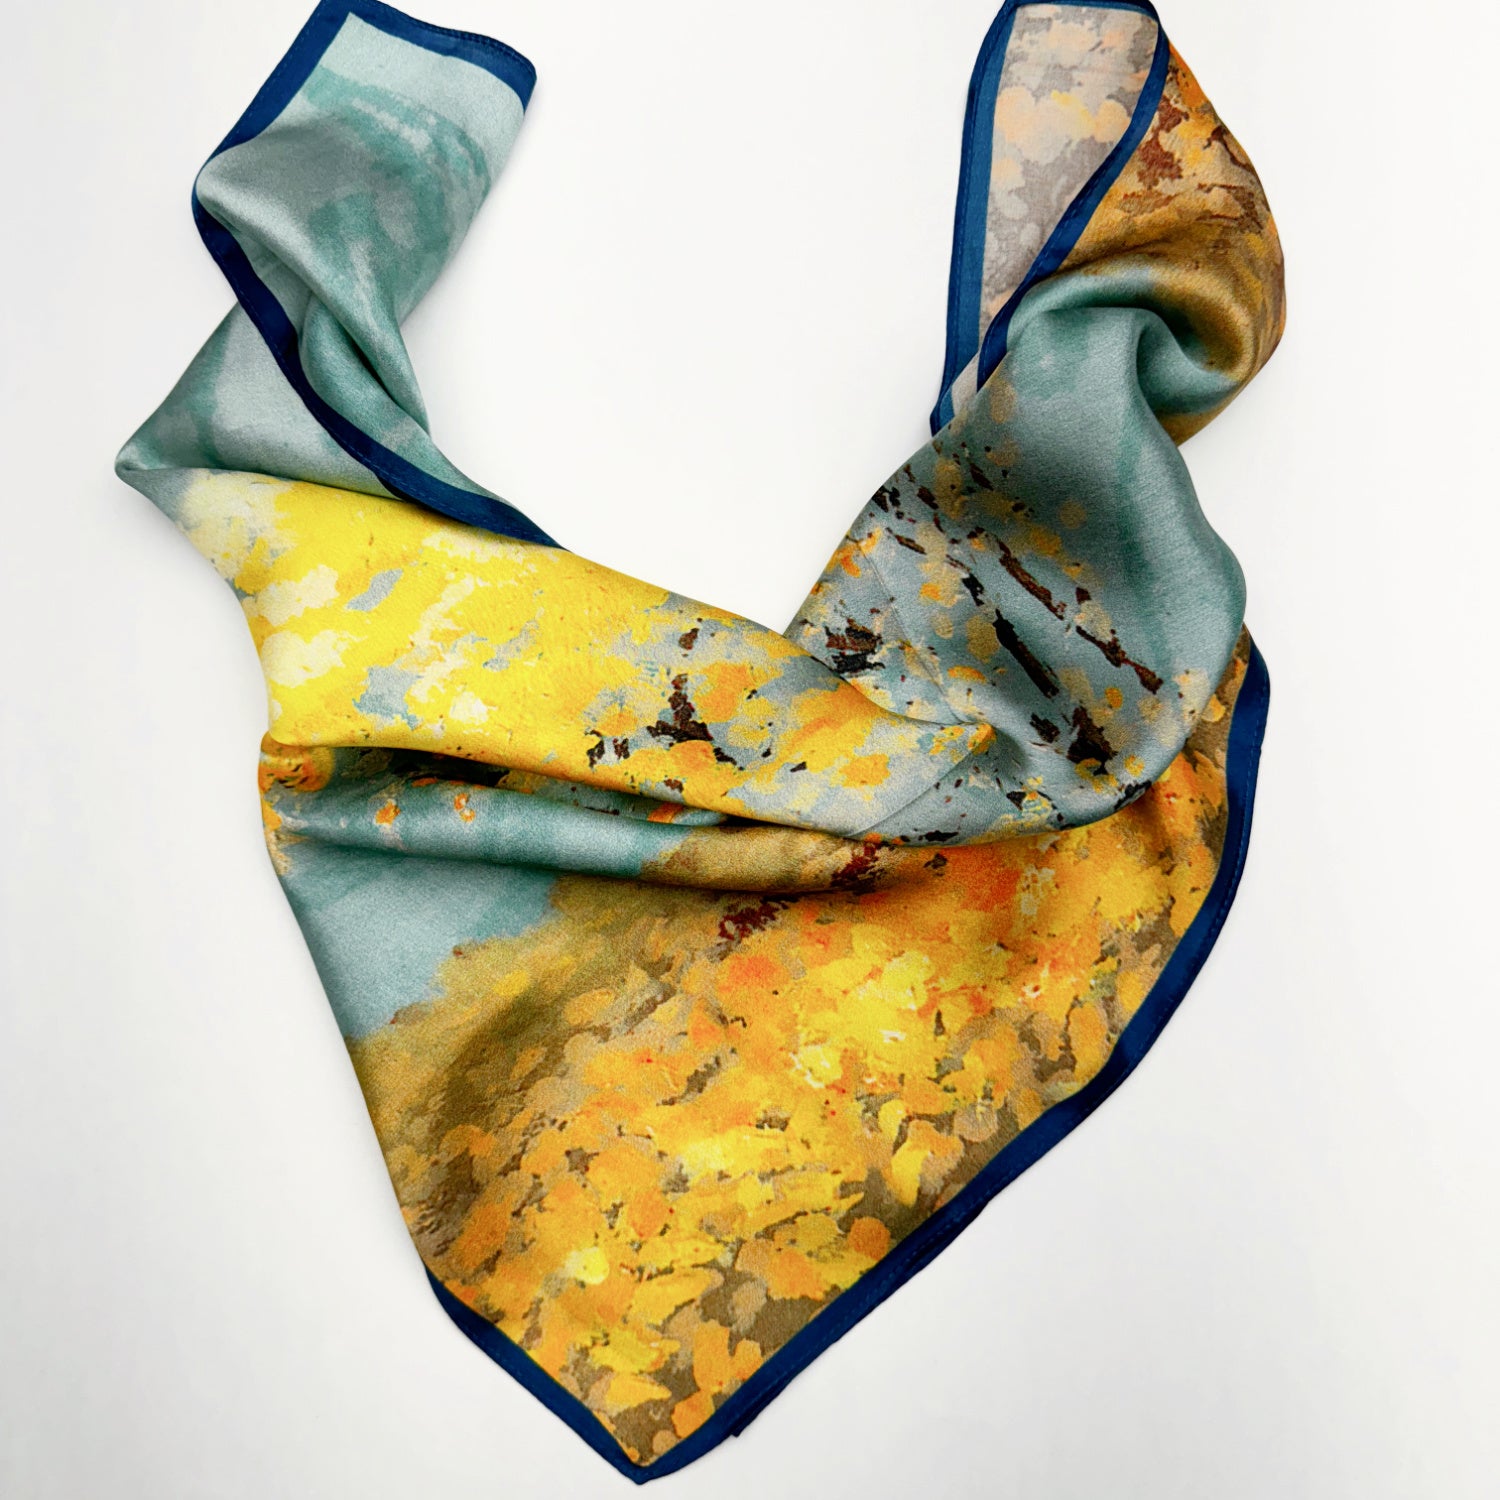 Natural Scarf Gift, Silk Scarf, Women Silk Scarf, Men Silk Scarf, Silk Wrap, Silk Scarves, Hand Dyed Silk, Silk Hair Scarf, Silk Bandana, Silk Square Scarf, Silk Headband, Silk Ponytail Scarf, Gifts for Girlfriend, Gifts for Mom, Gifts for Sister, Gifts for Wife, Gifts for Her, Gifts